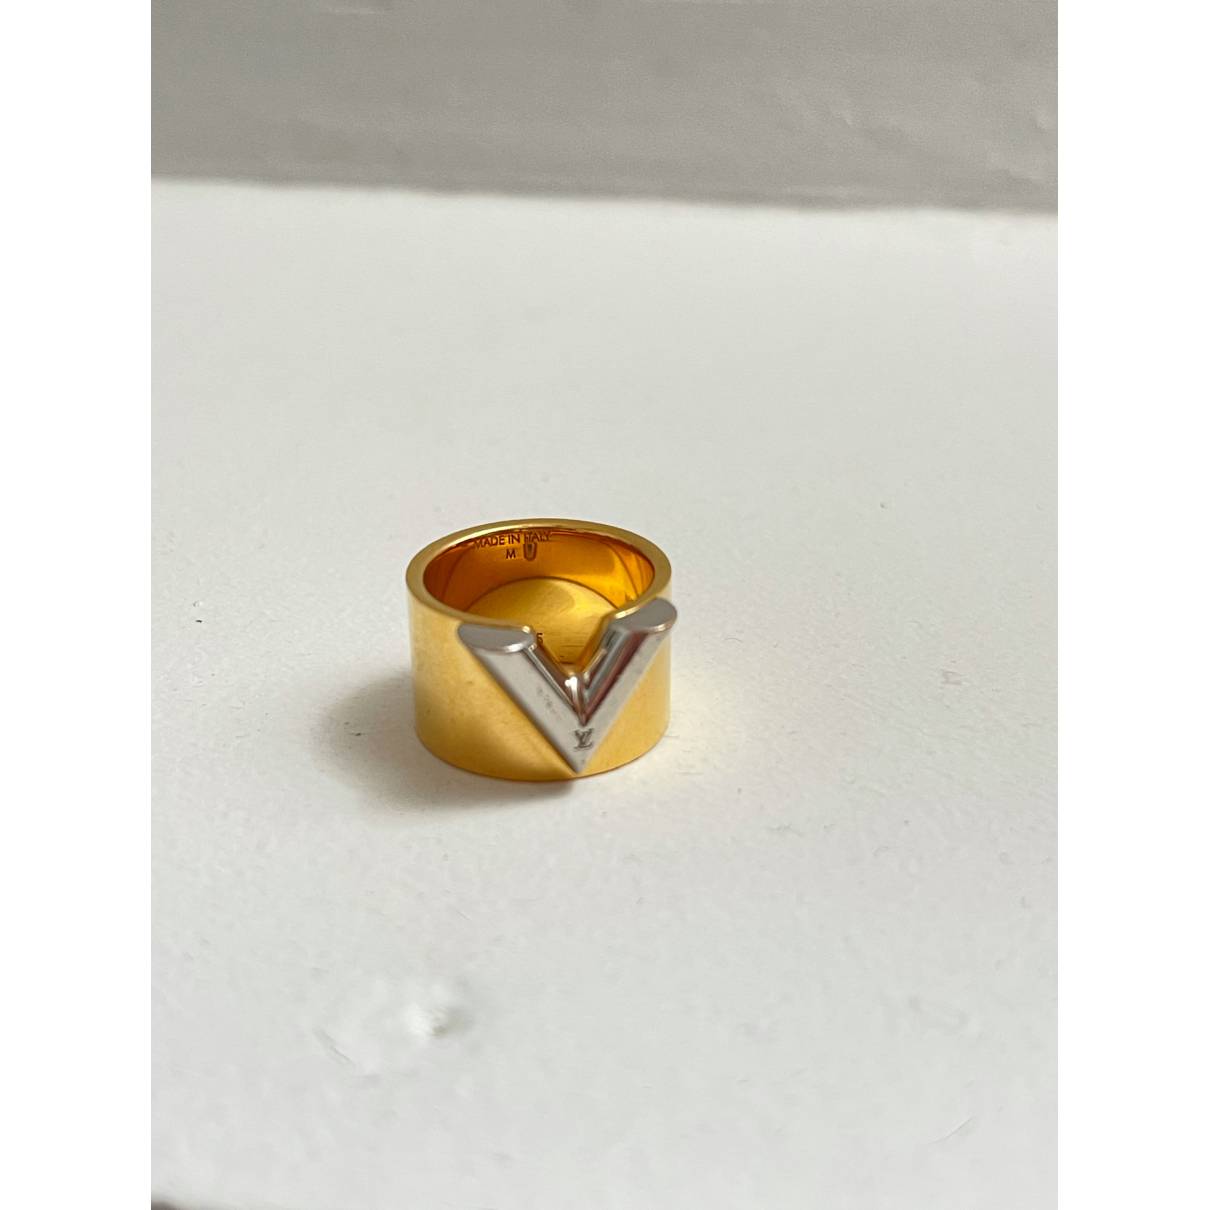 Louis Vuitton - Authenticated Ring - Metal Gold For Woman, Good condition